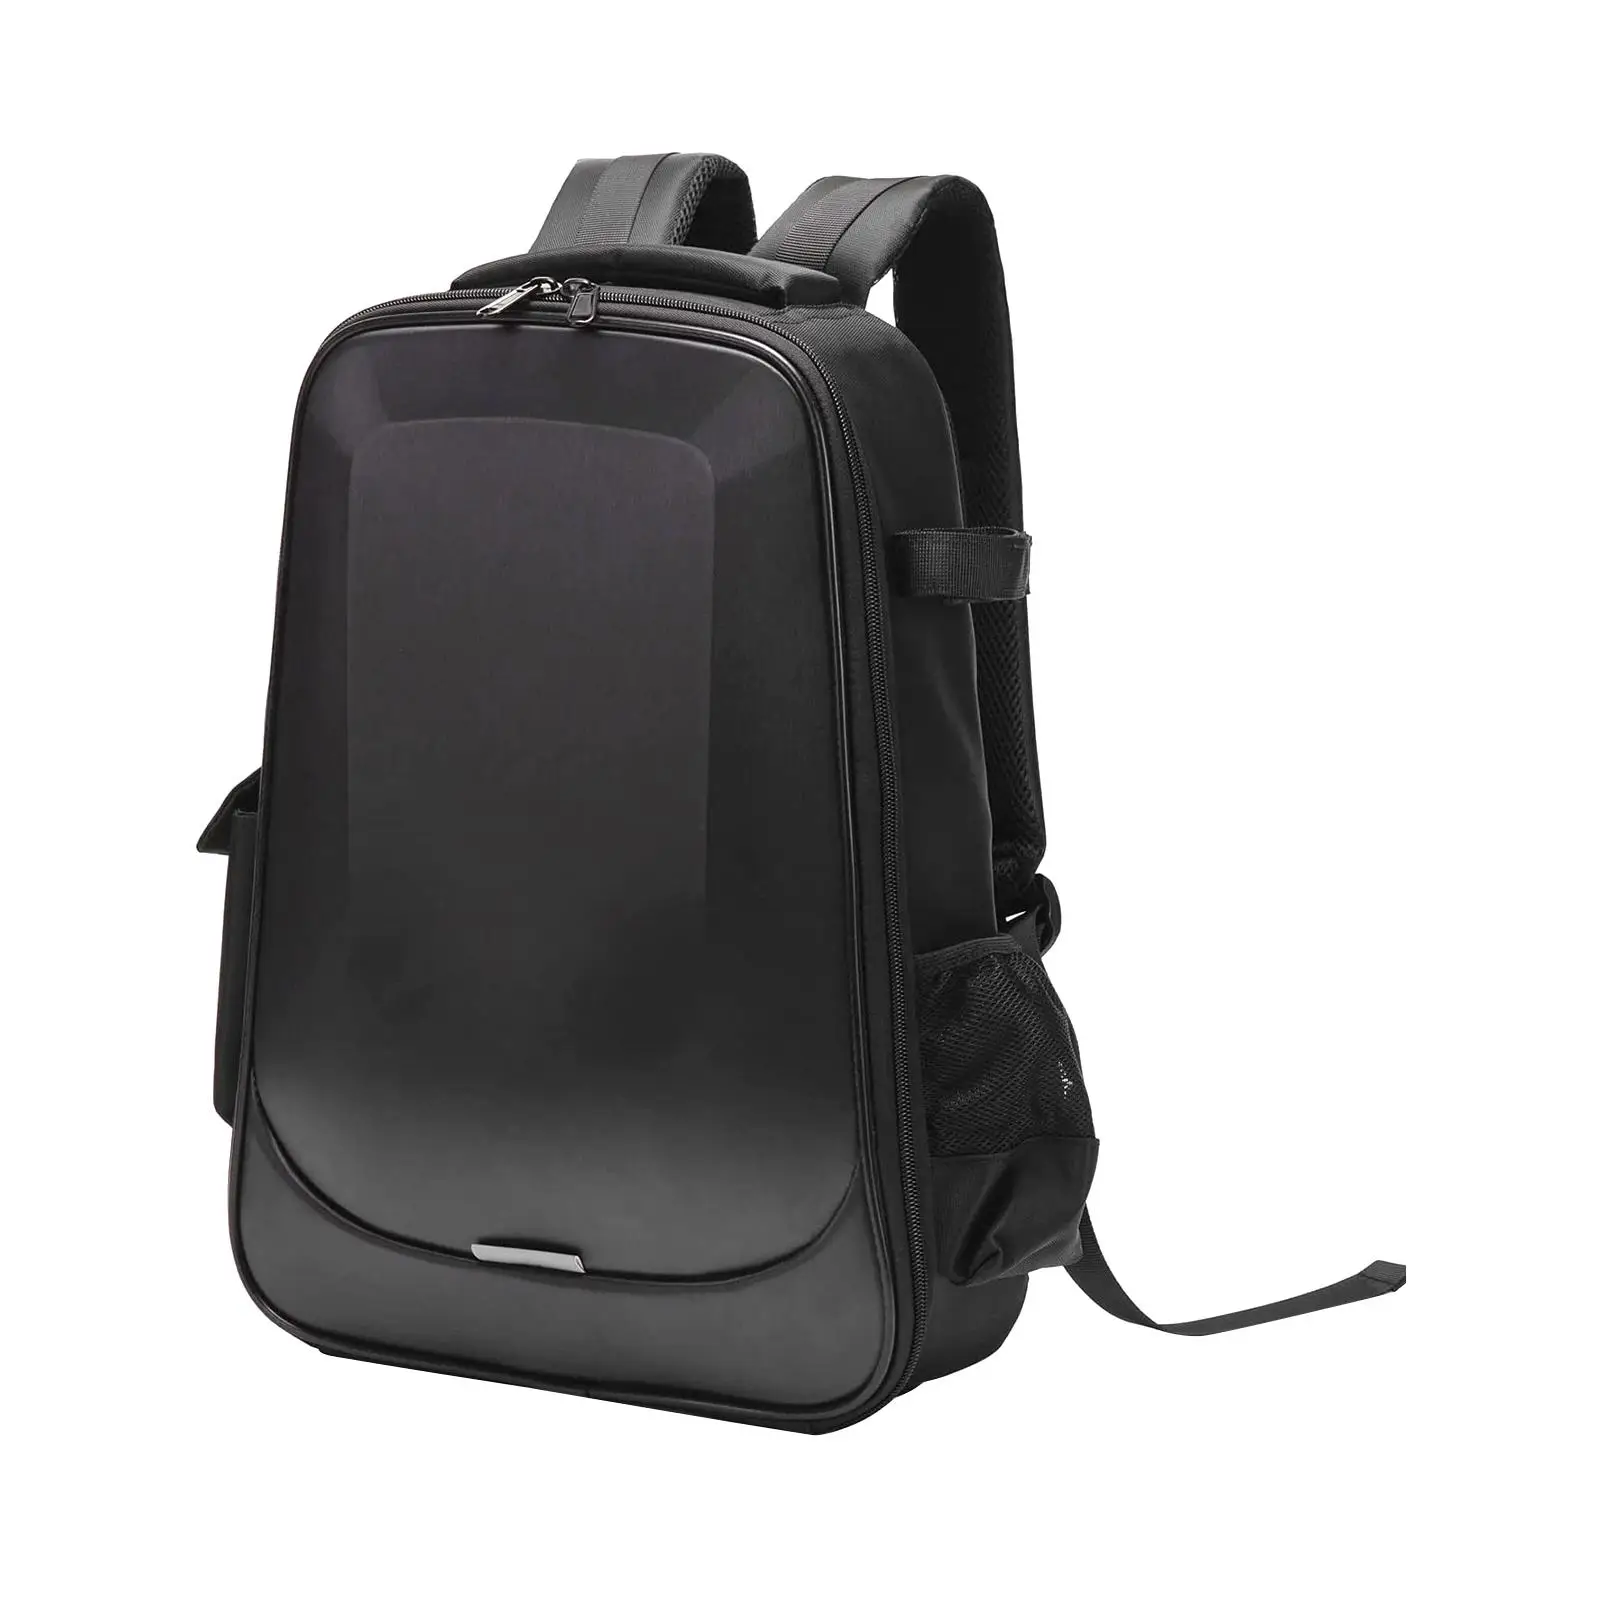  Backpack Large Capacity with Zipper EVA Hard Case Professional Portable Storage Bag for Accessories Home Travel